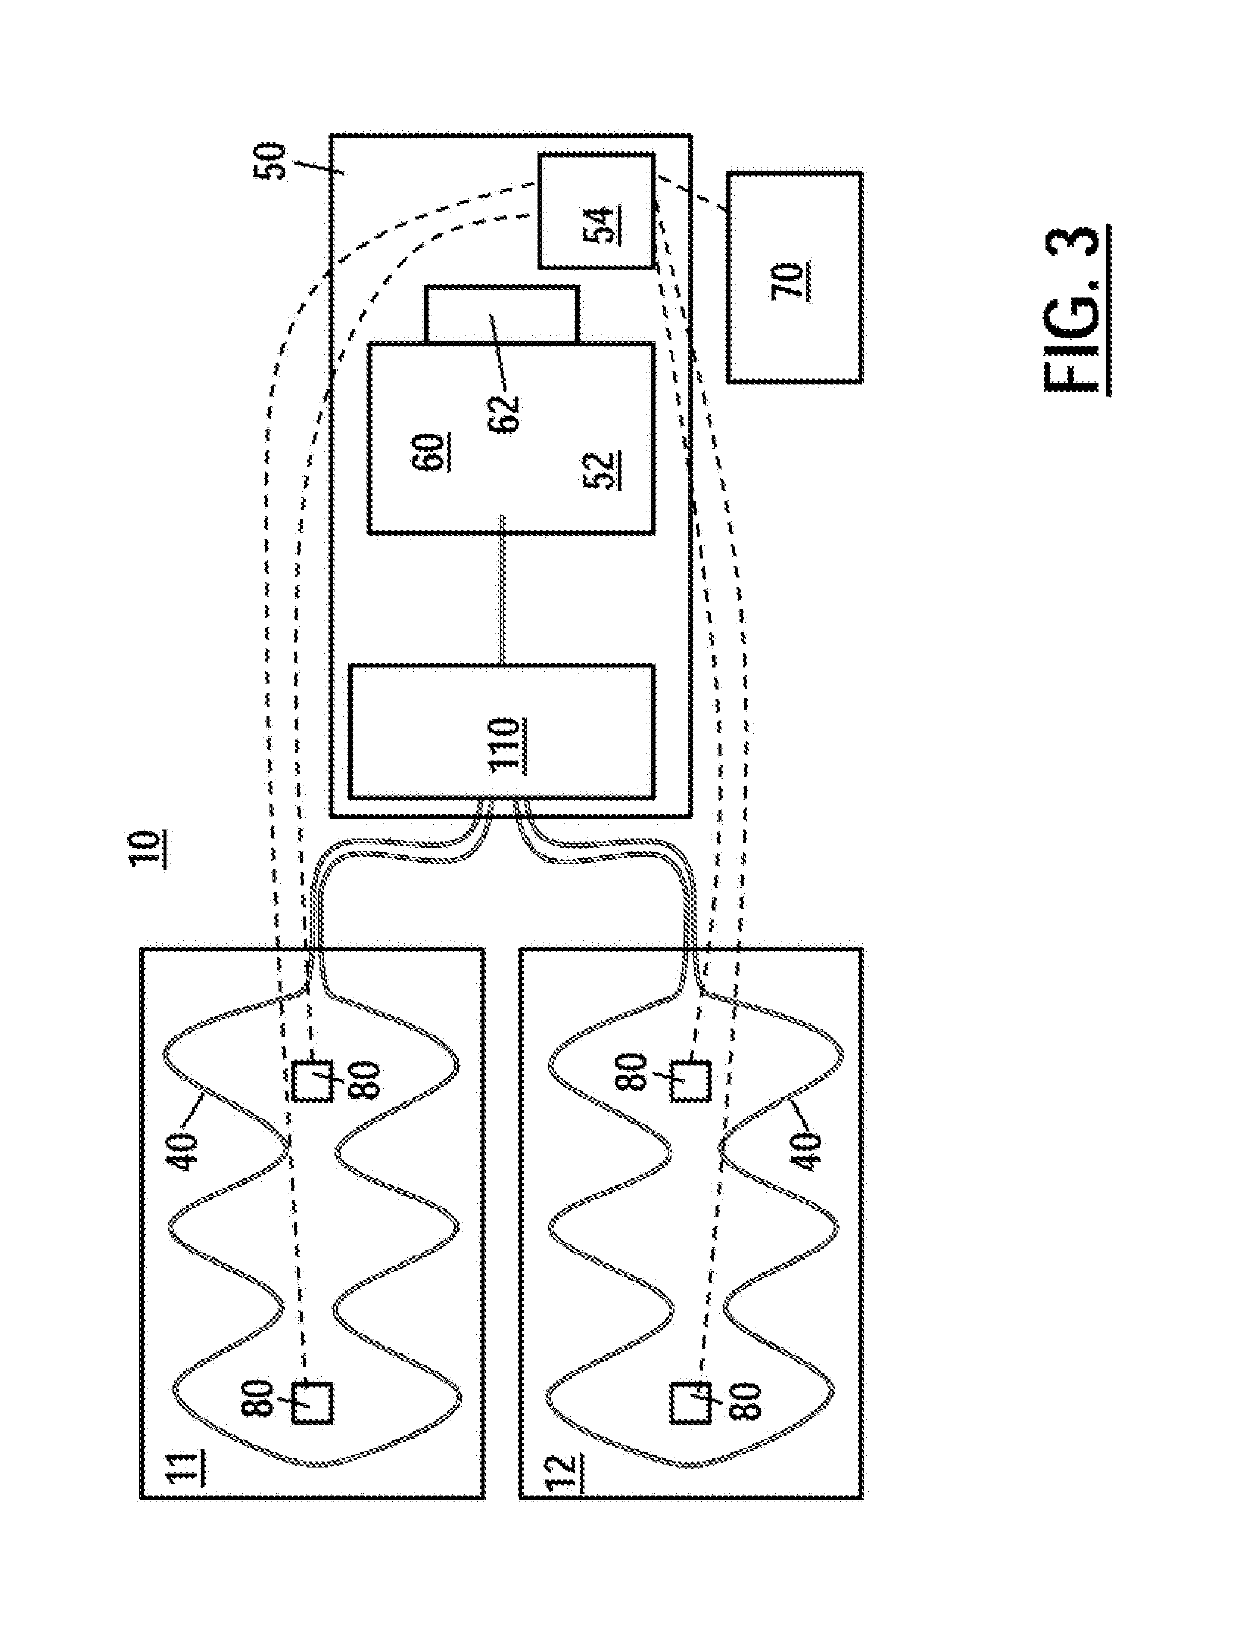 Multi-zone temperature modulation system for bed or blanket